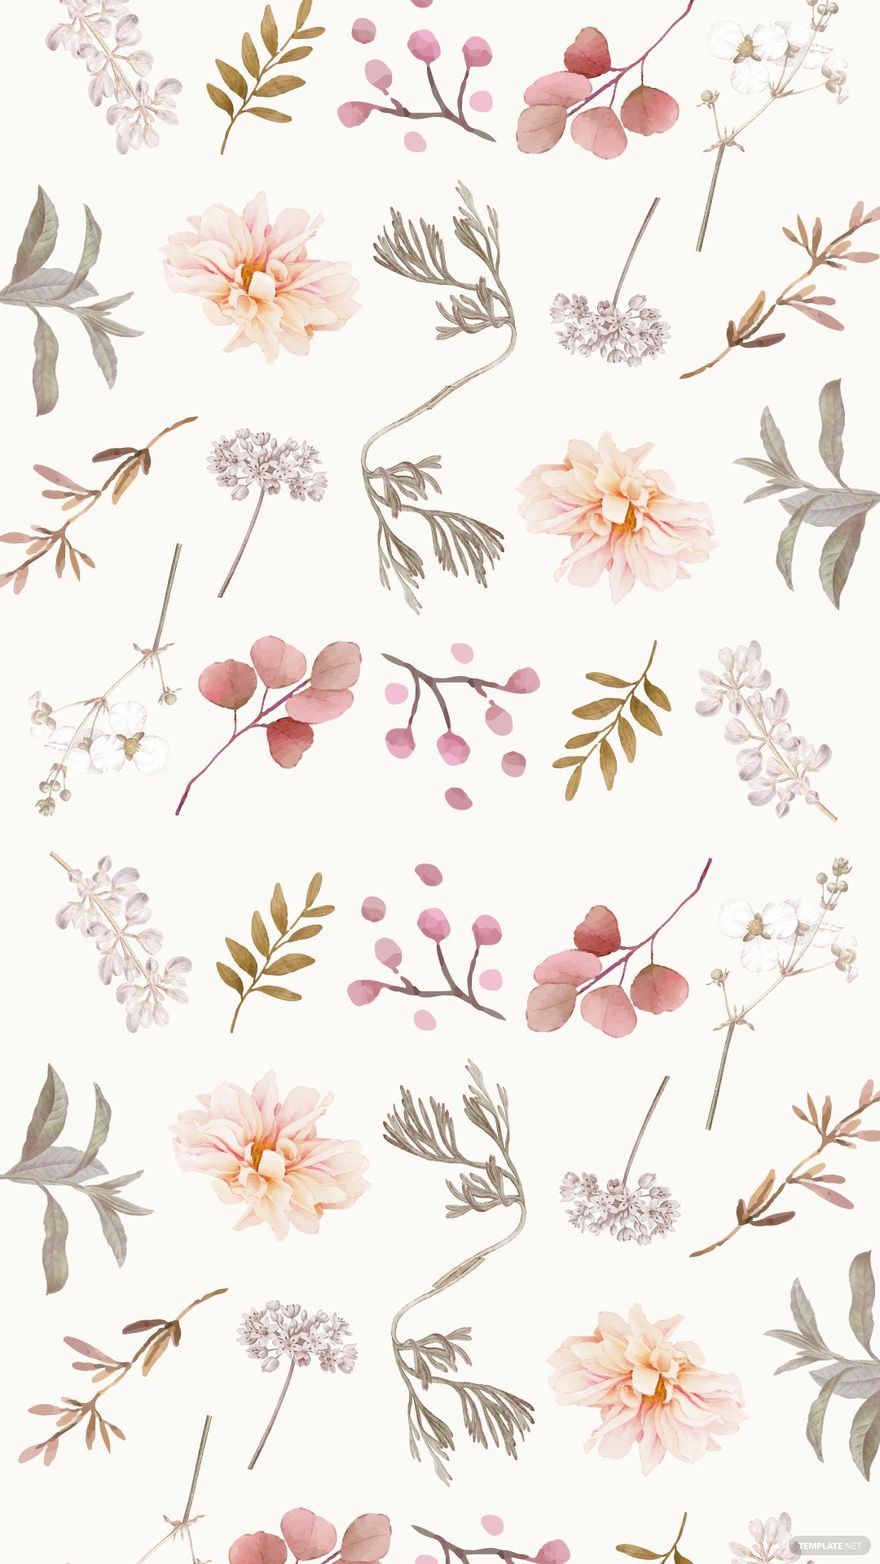 Fall Floral Background